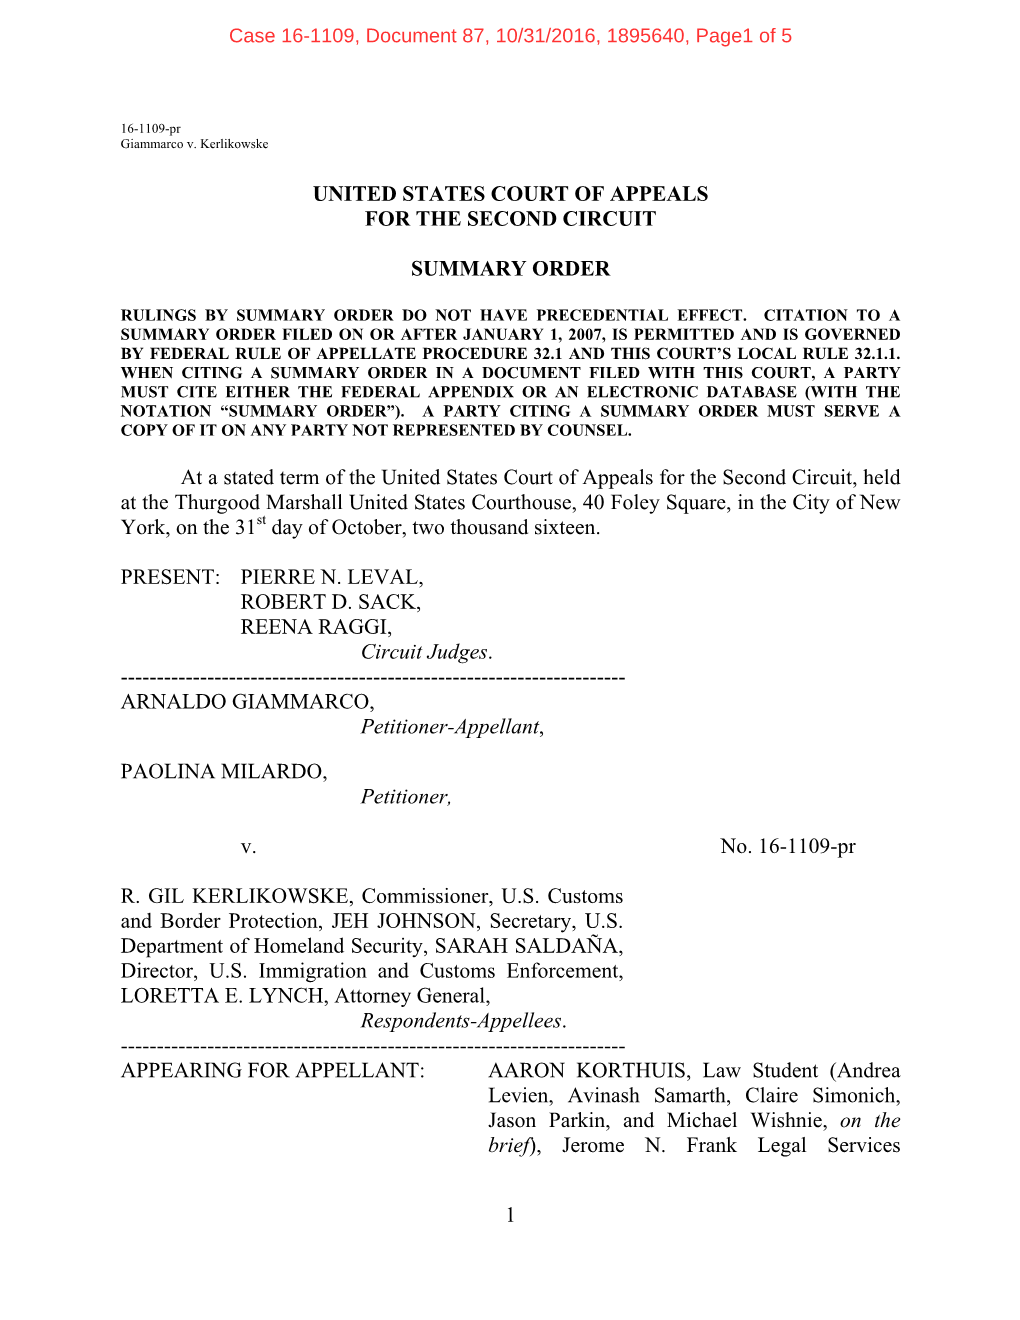 United States Court of Appeals for the Second Circuit Summary Order